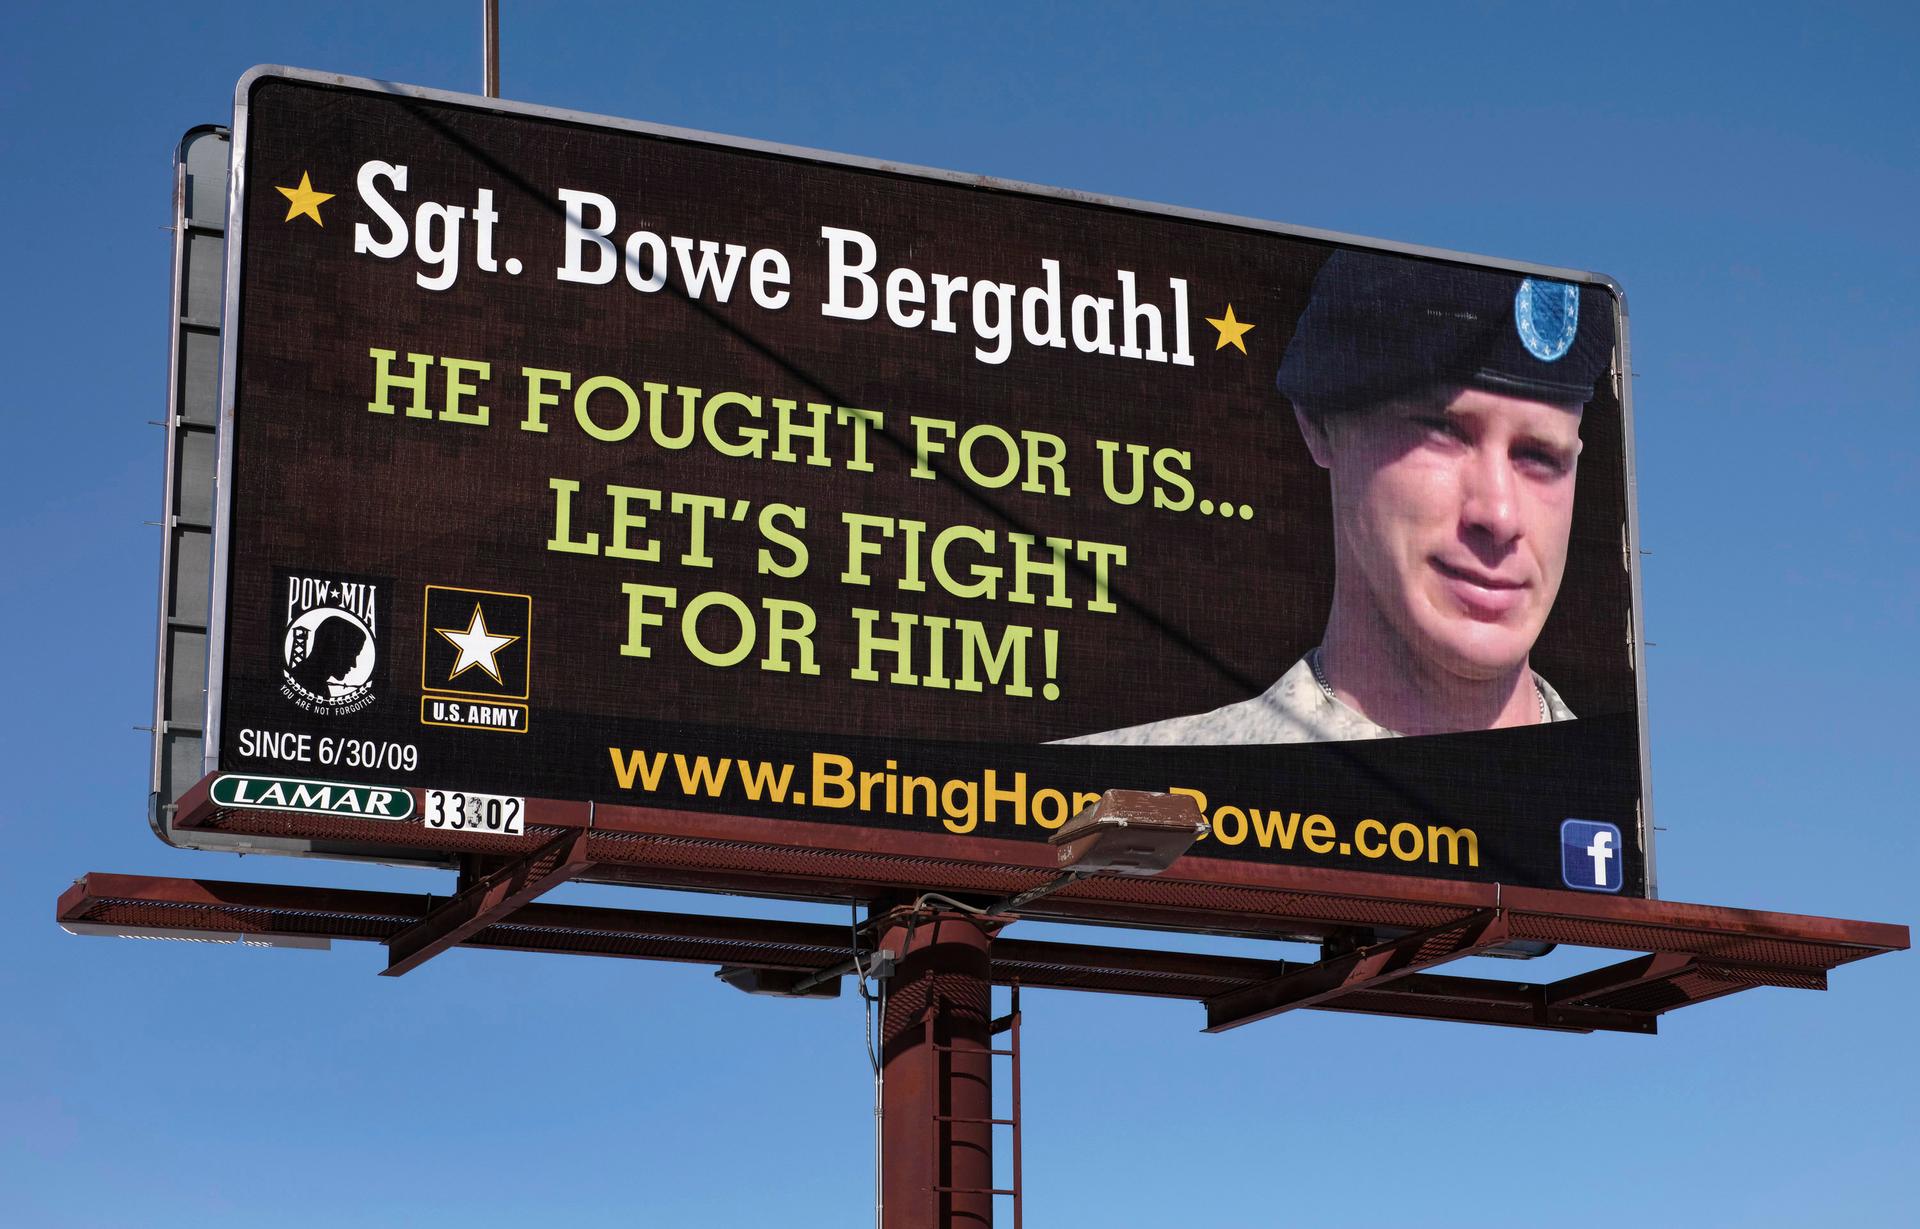 A billboard calling for the release of US Army Sergeant Bowe Bergdahl, held for nearly five years by the Taliban after being captured in Afghanistan, is shown in this picture taken near Spokane, Washington on February 25, 2014. Bergdahl has been released 